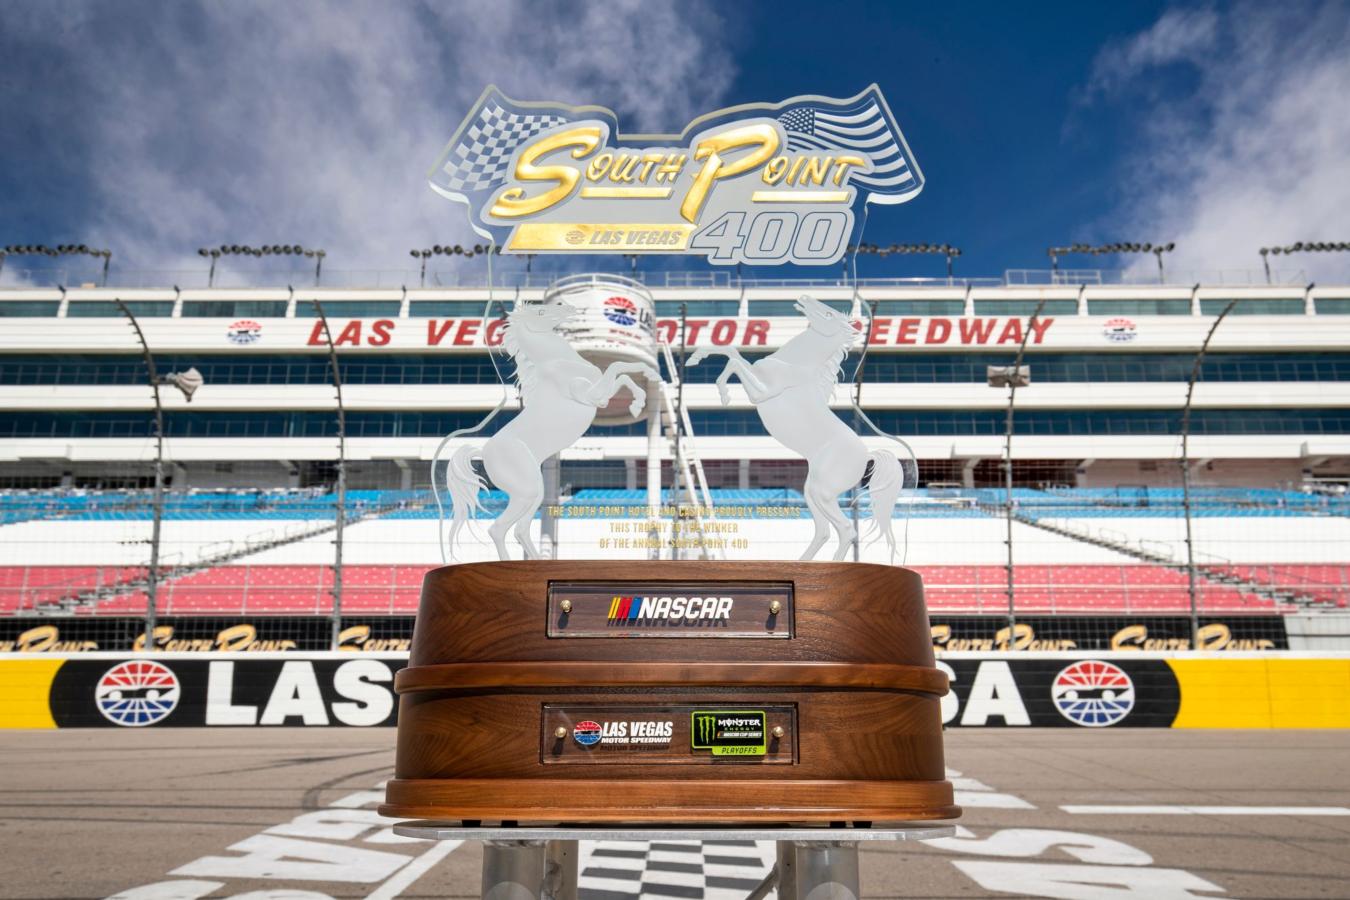 South Point Hotel Casino and Spa unveils official South Point 400